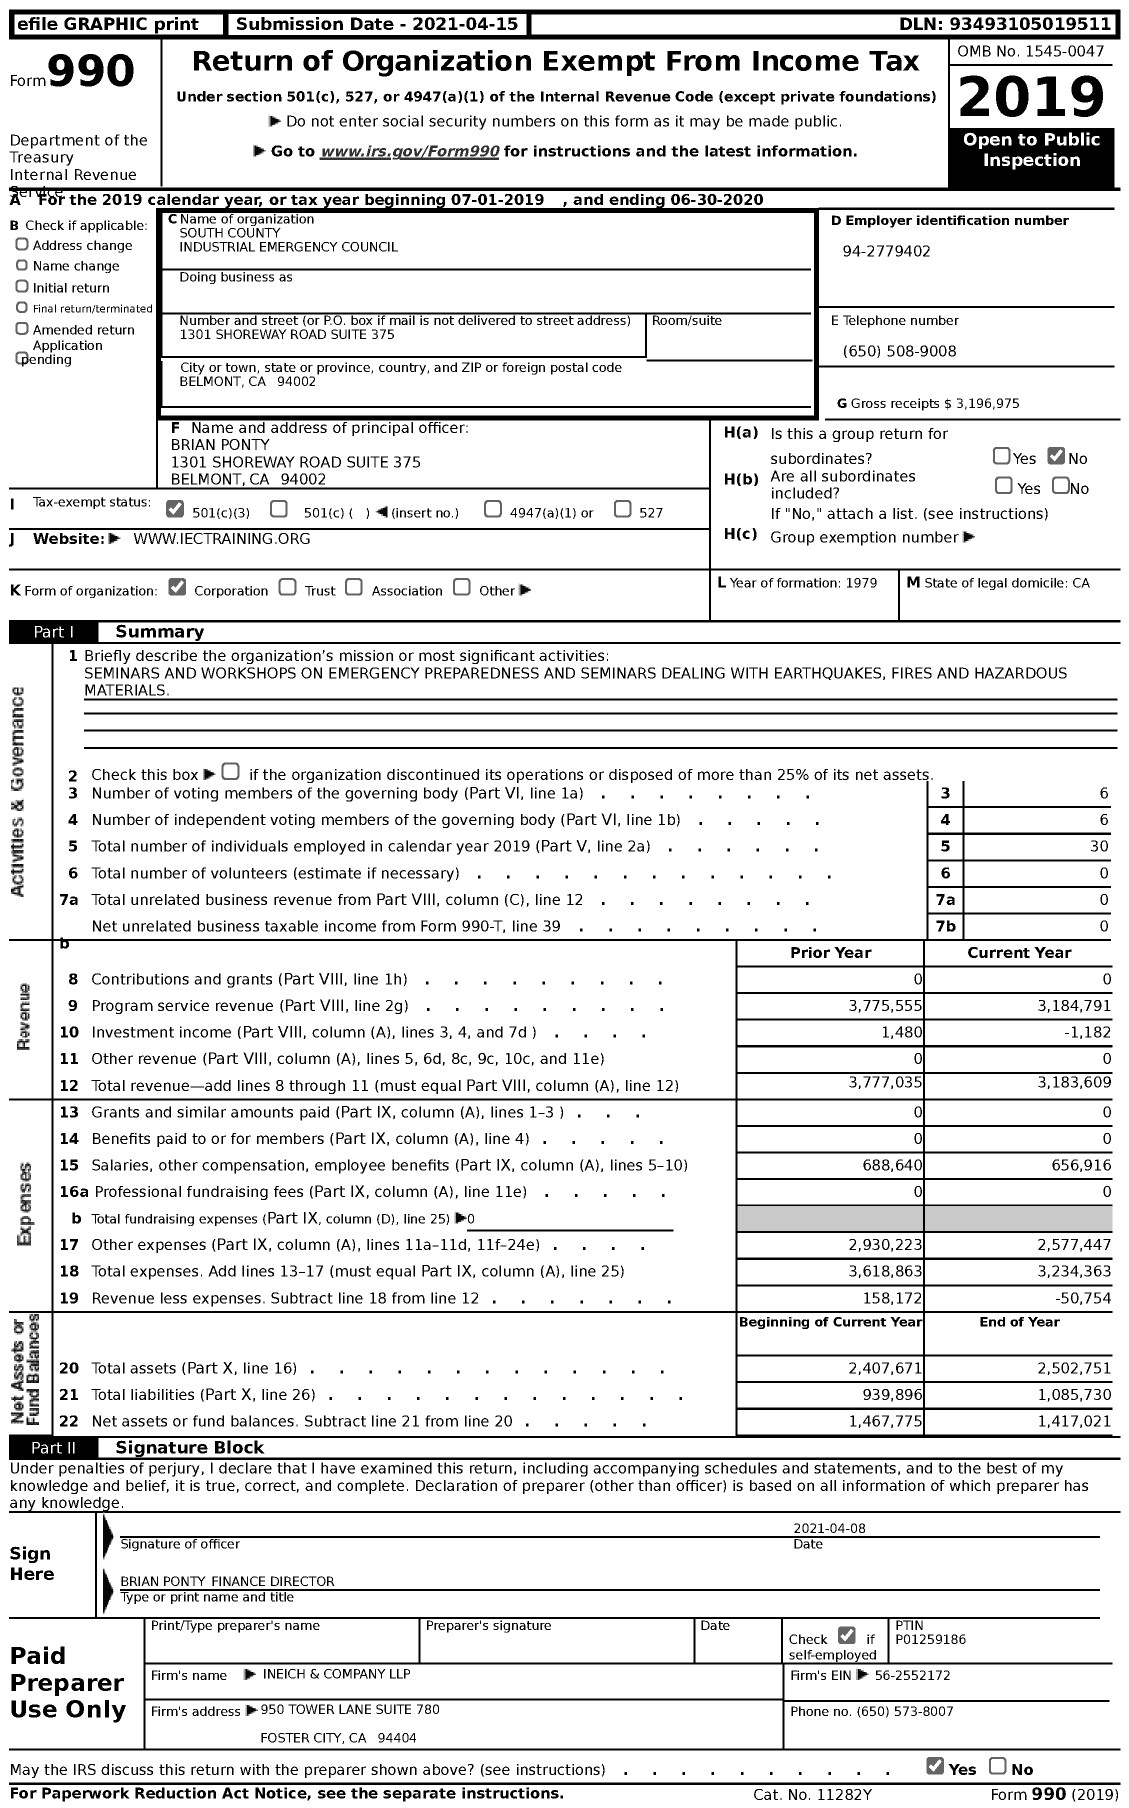 Image of first page of 2019 Form 990 for Industrial Emergency Council (IEC)